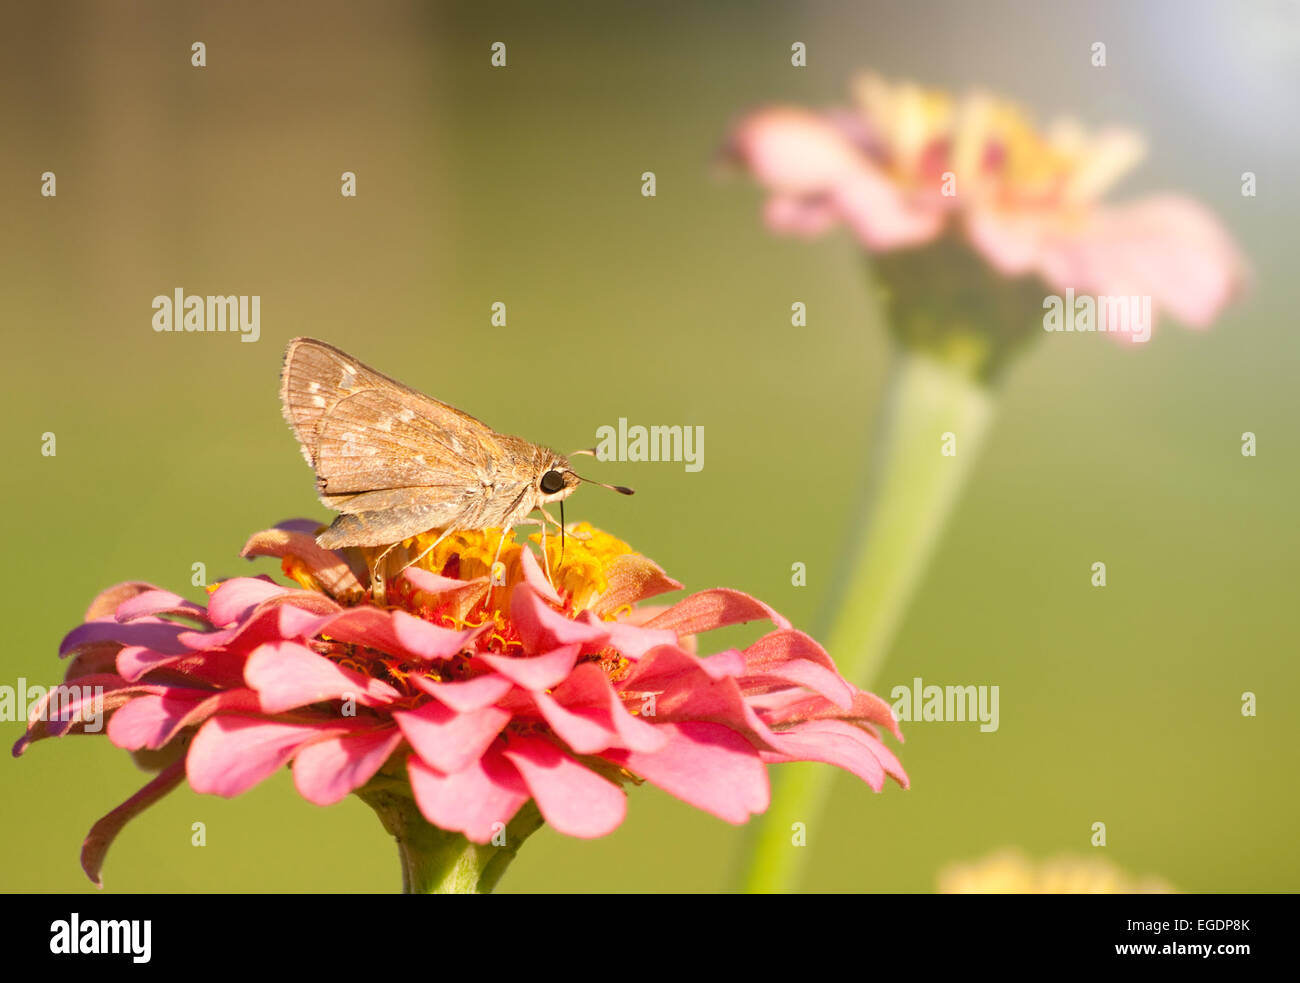 Tiny Skipper Butterfly feeding on a pink Zinnia against green background Stock Photo